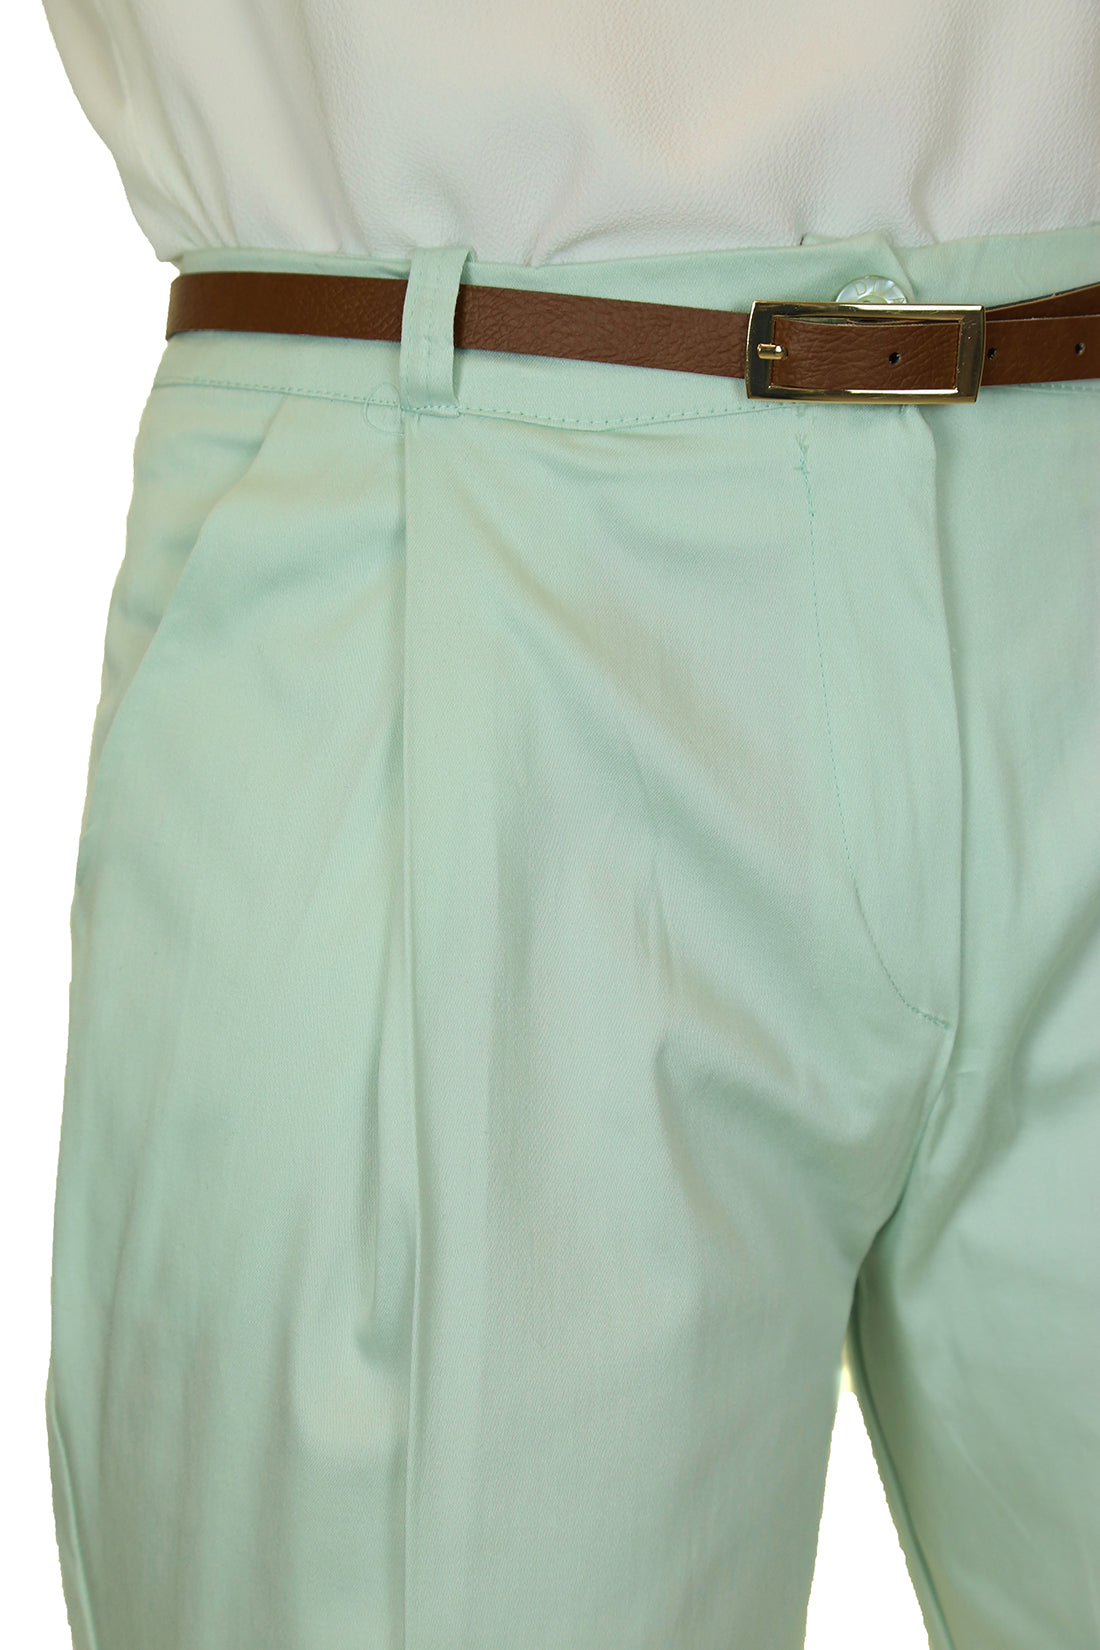 Chino Pleated Tapered Cigarette Leg Trousers Mint Green